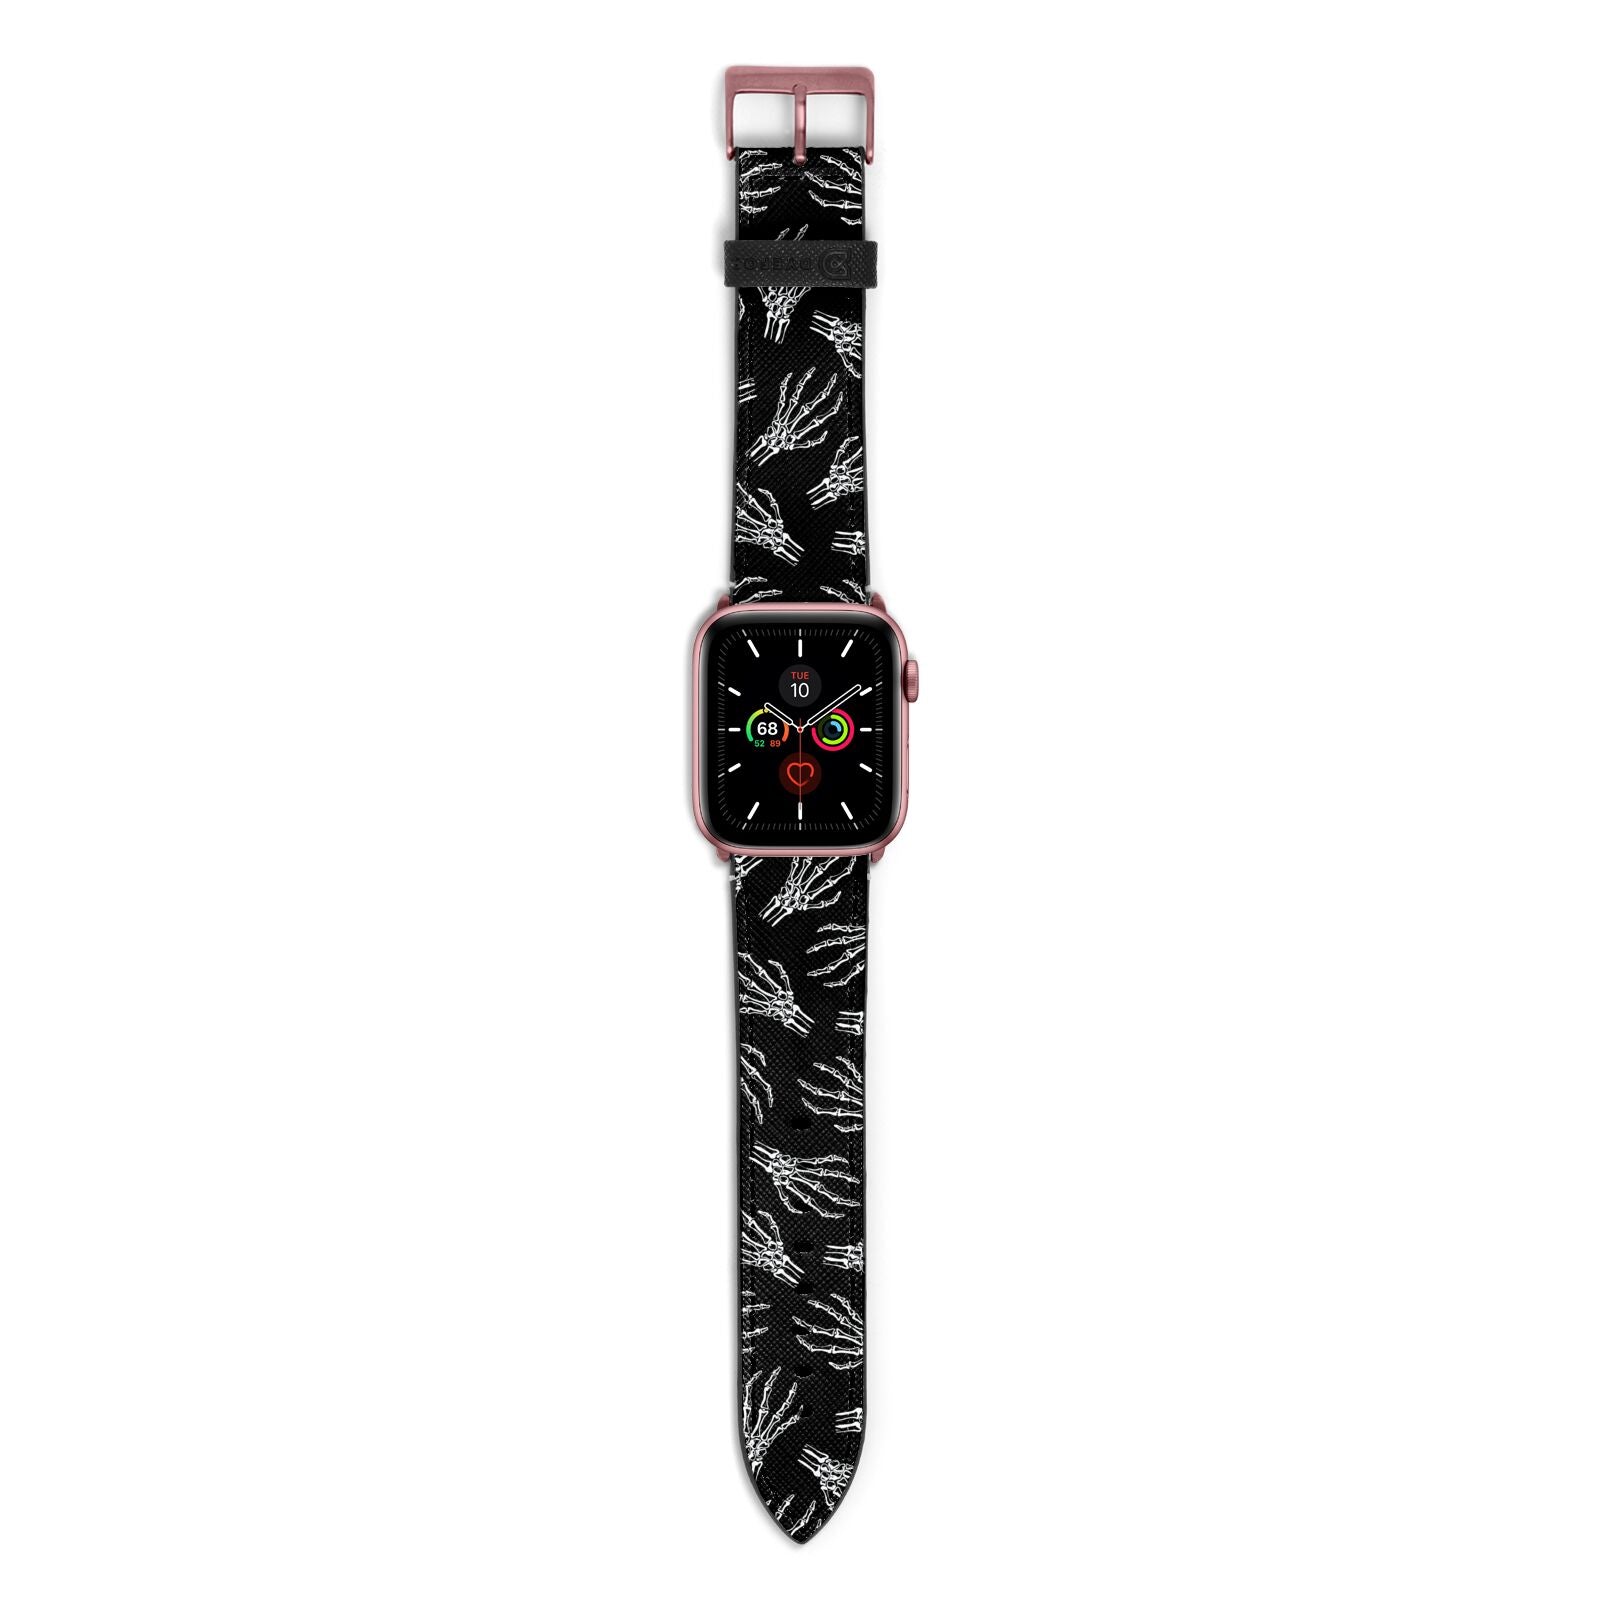 Skeleton Hands Apple Watch Strap with Rose Gold Hardware